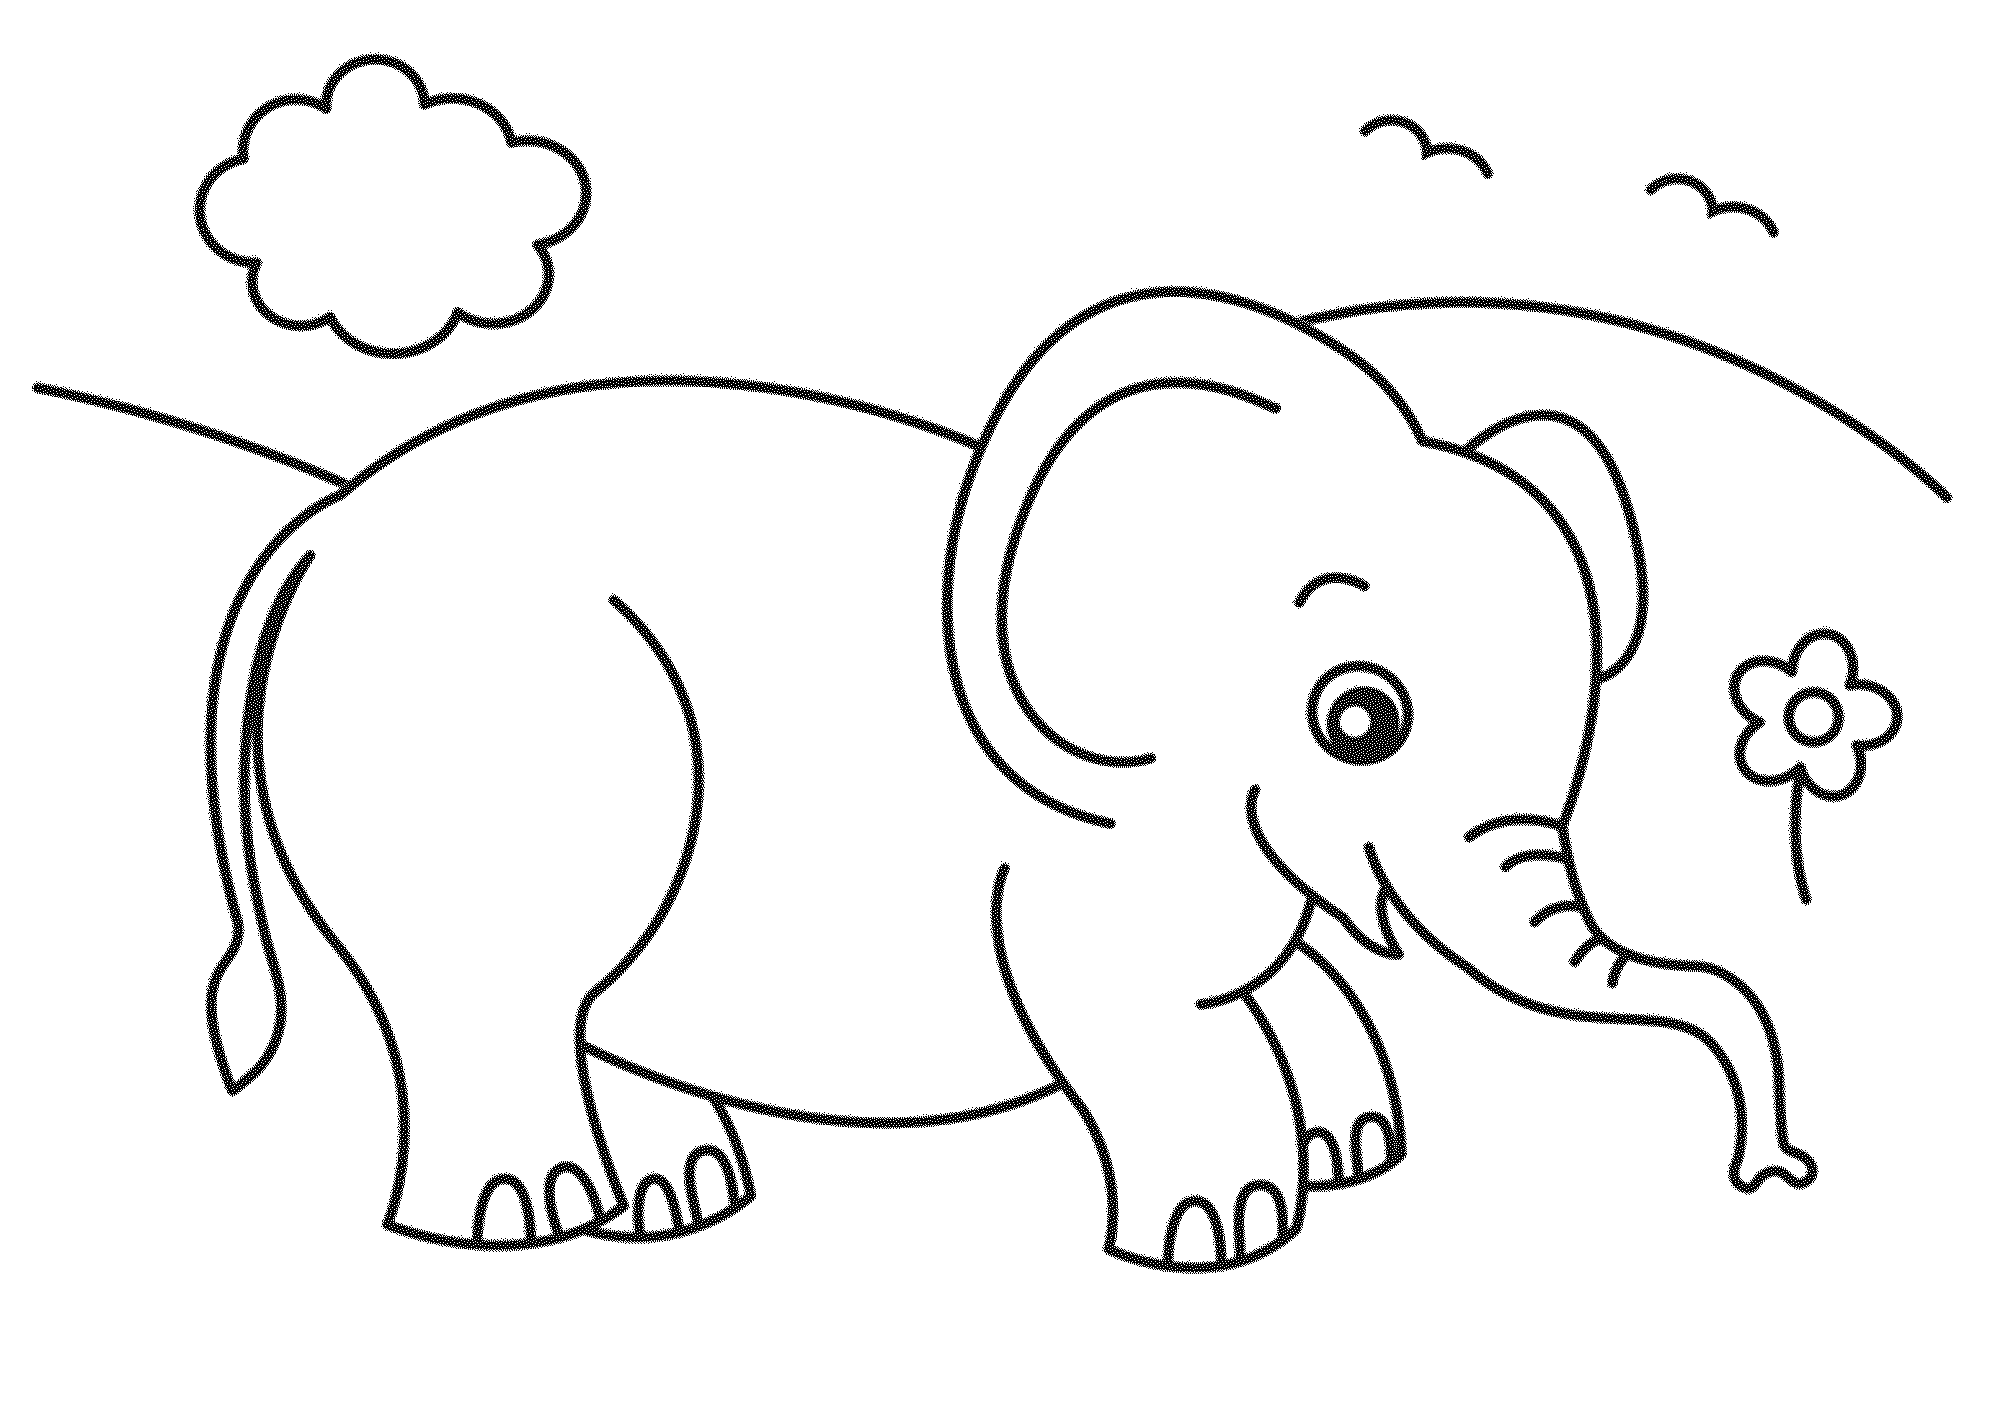 coloring pages elephants free elephant coloring pages elephants coloring pages 